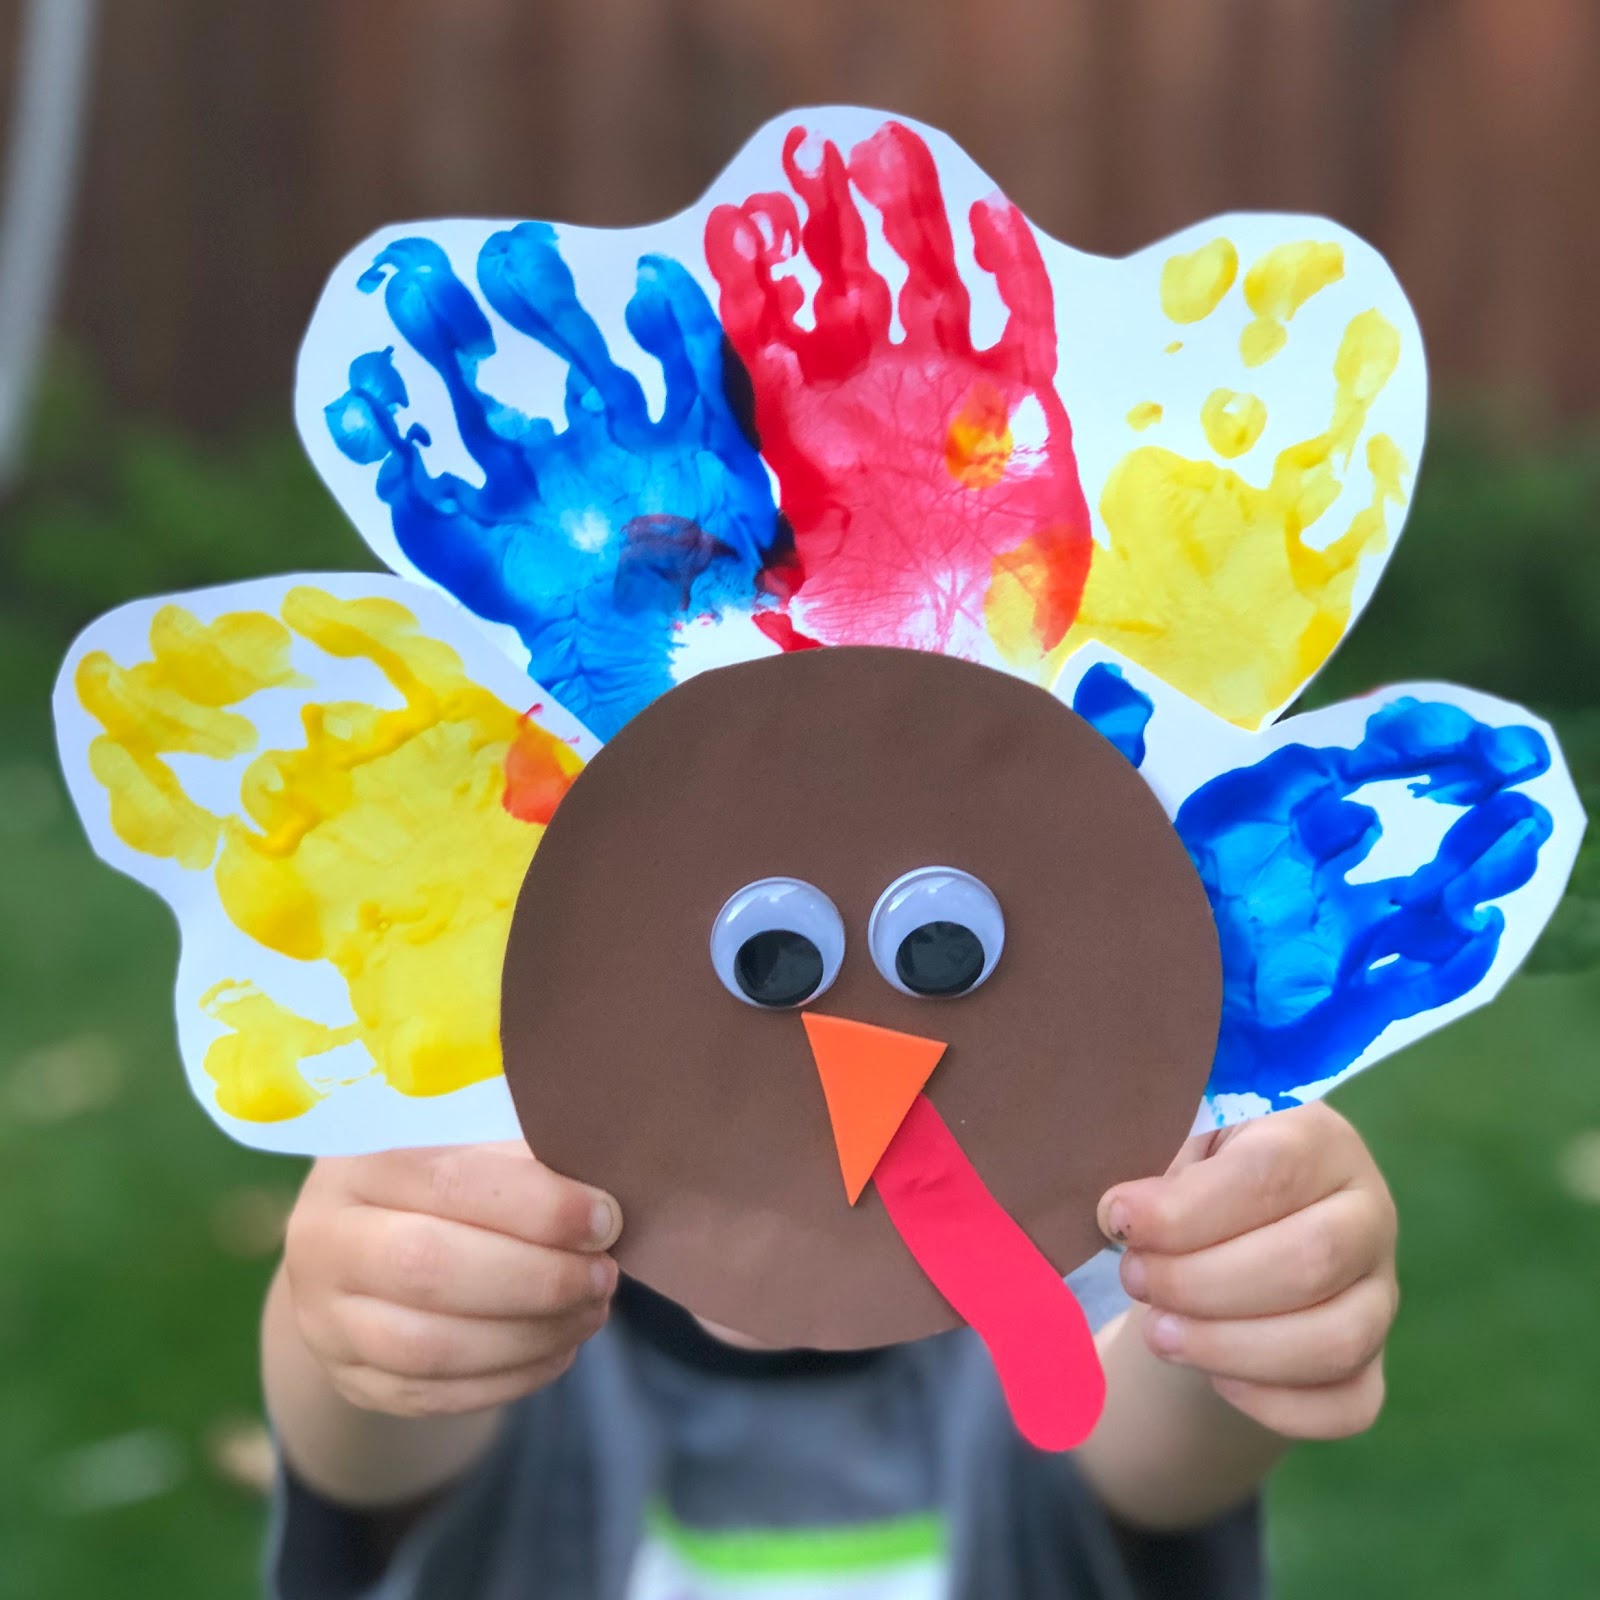 Toddler Approved!: Easy Handprint Turkey Craft for Toddlers - Thanksgiving Art And Craft Ideas For Toddlers